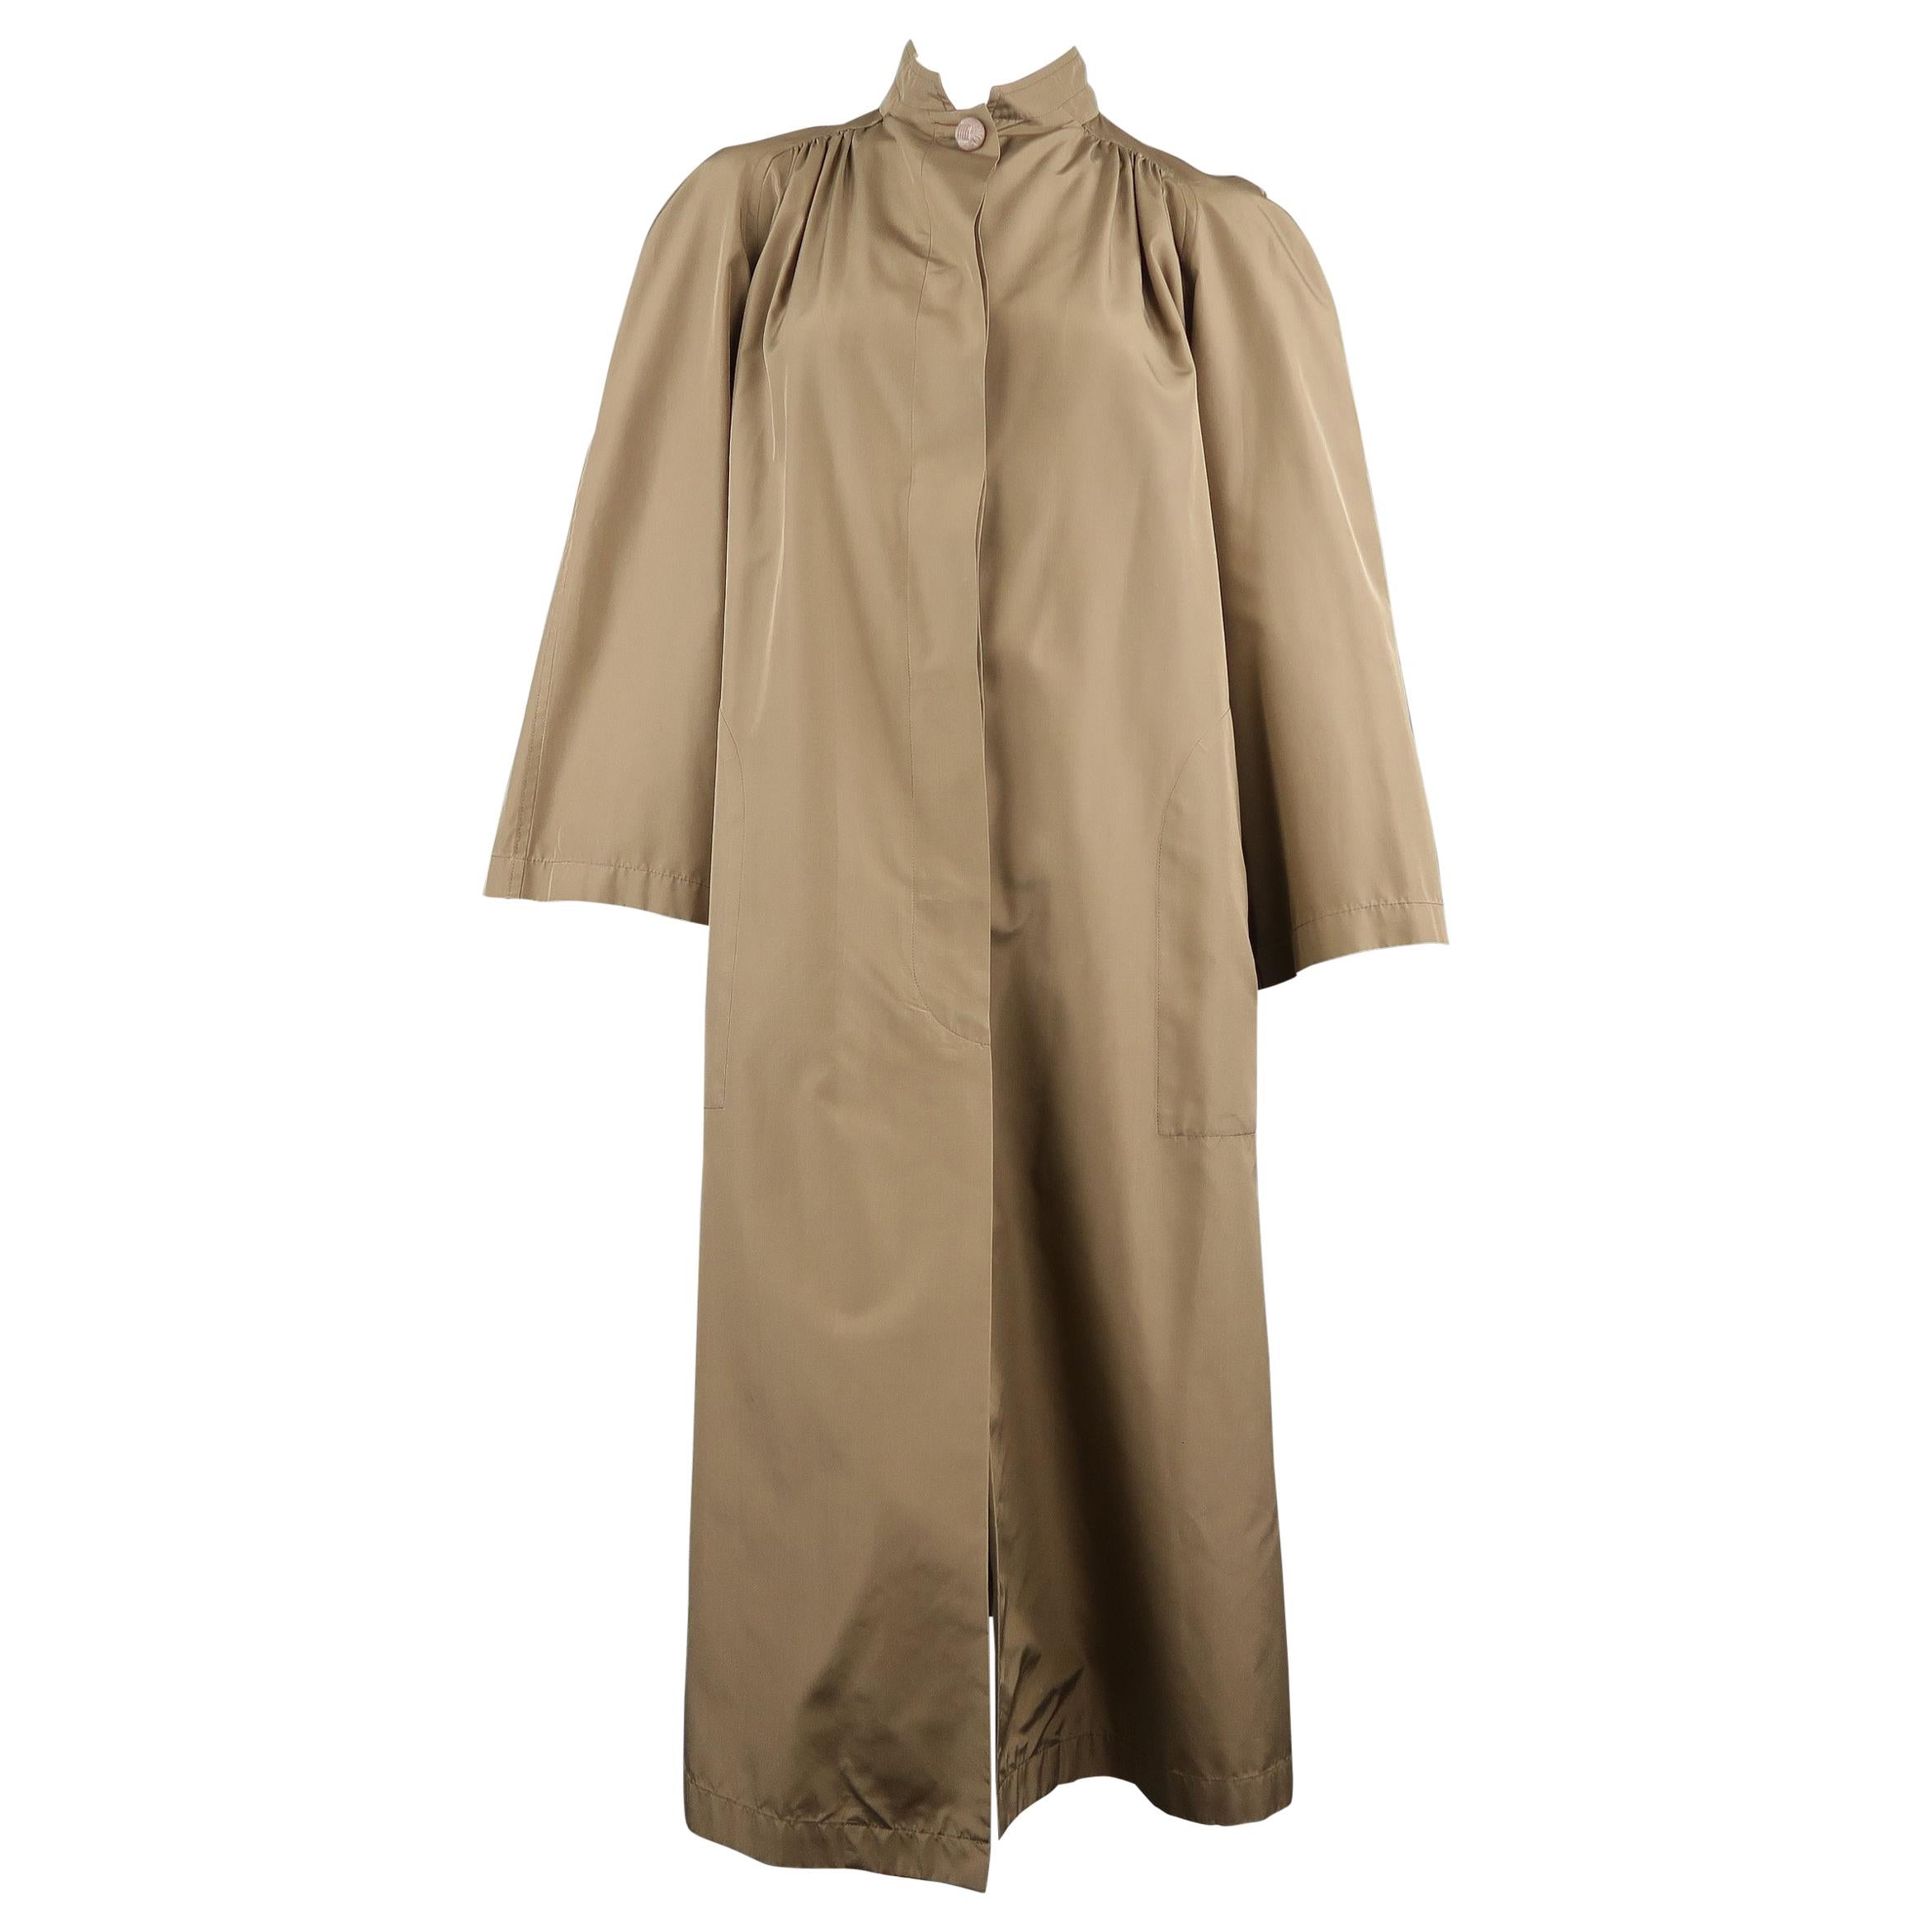 Vintage VALENTINO Tan High Collar Gathered A Line Over Coat